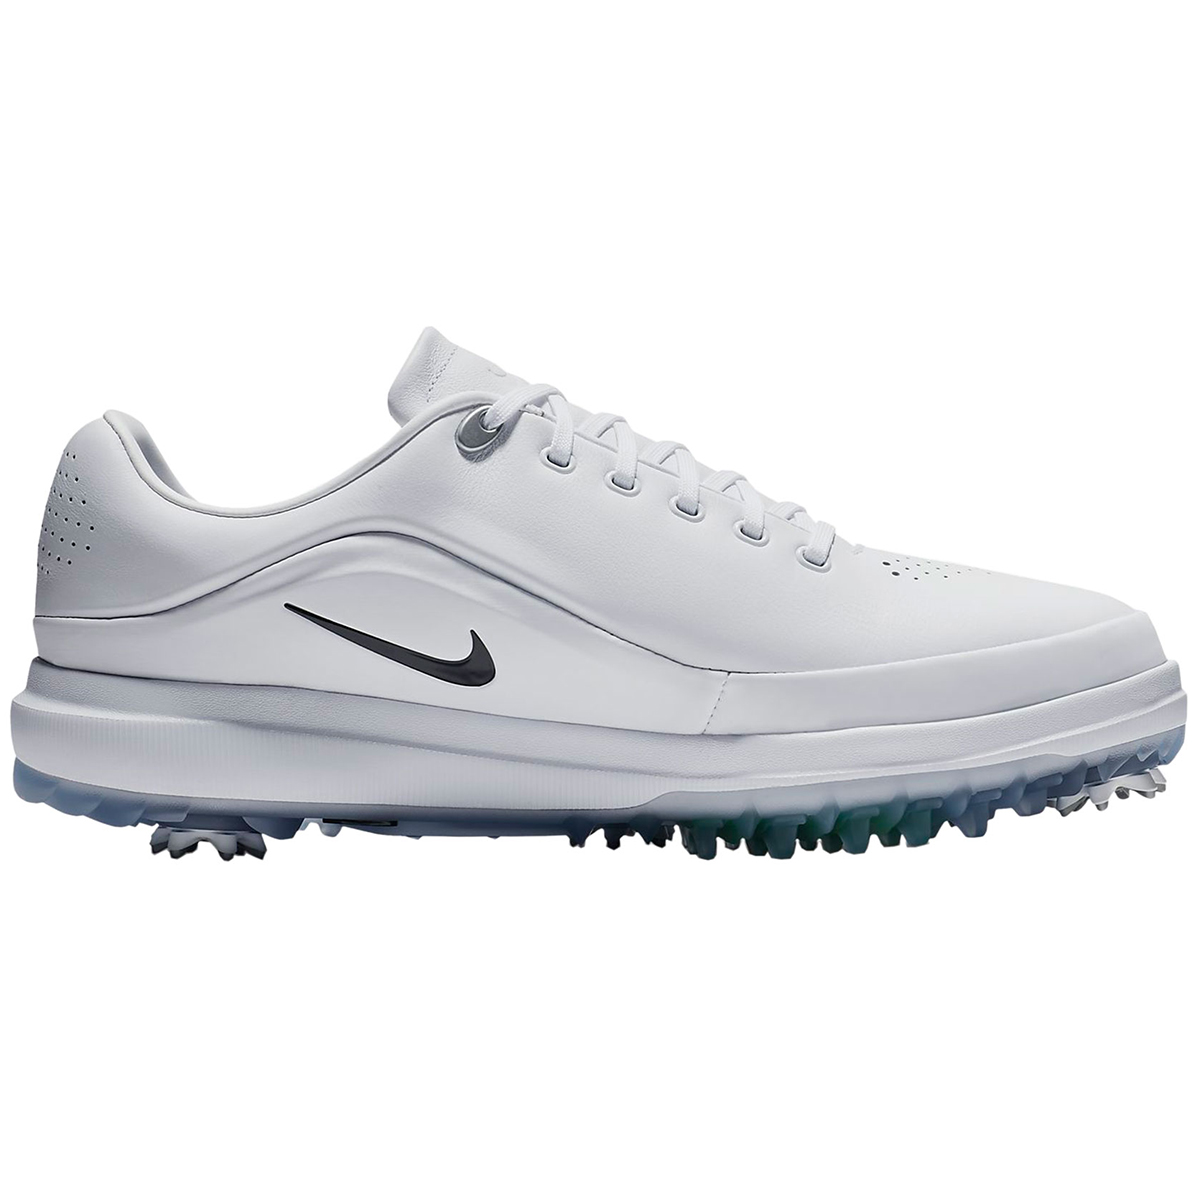 Nike Golf Air Zoom Precision Shoes from american golf